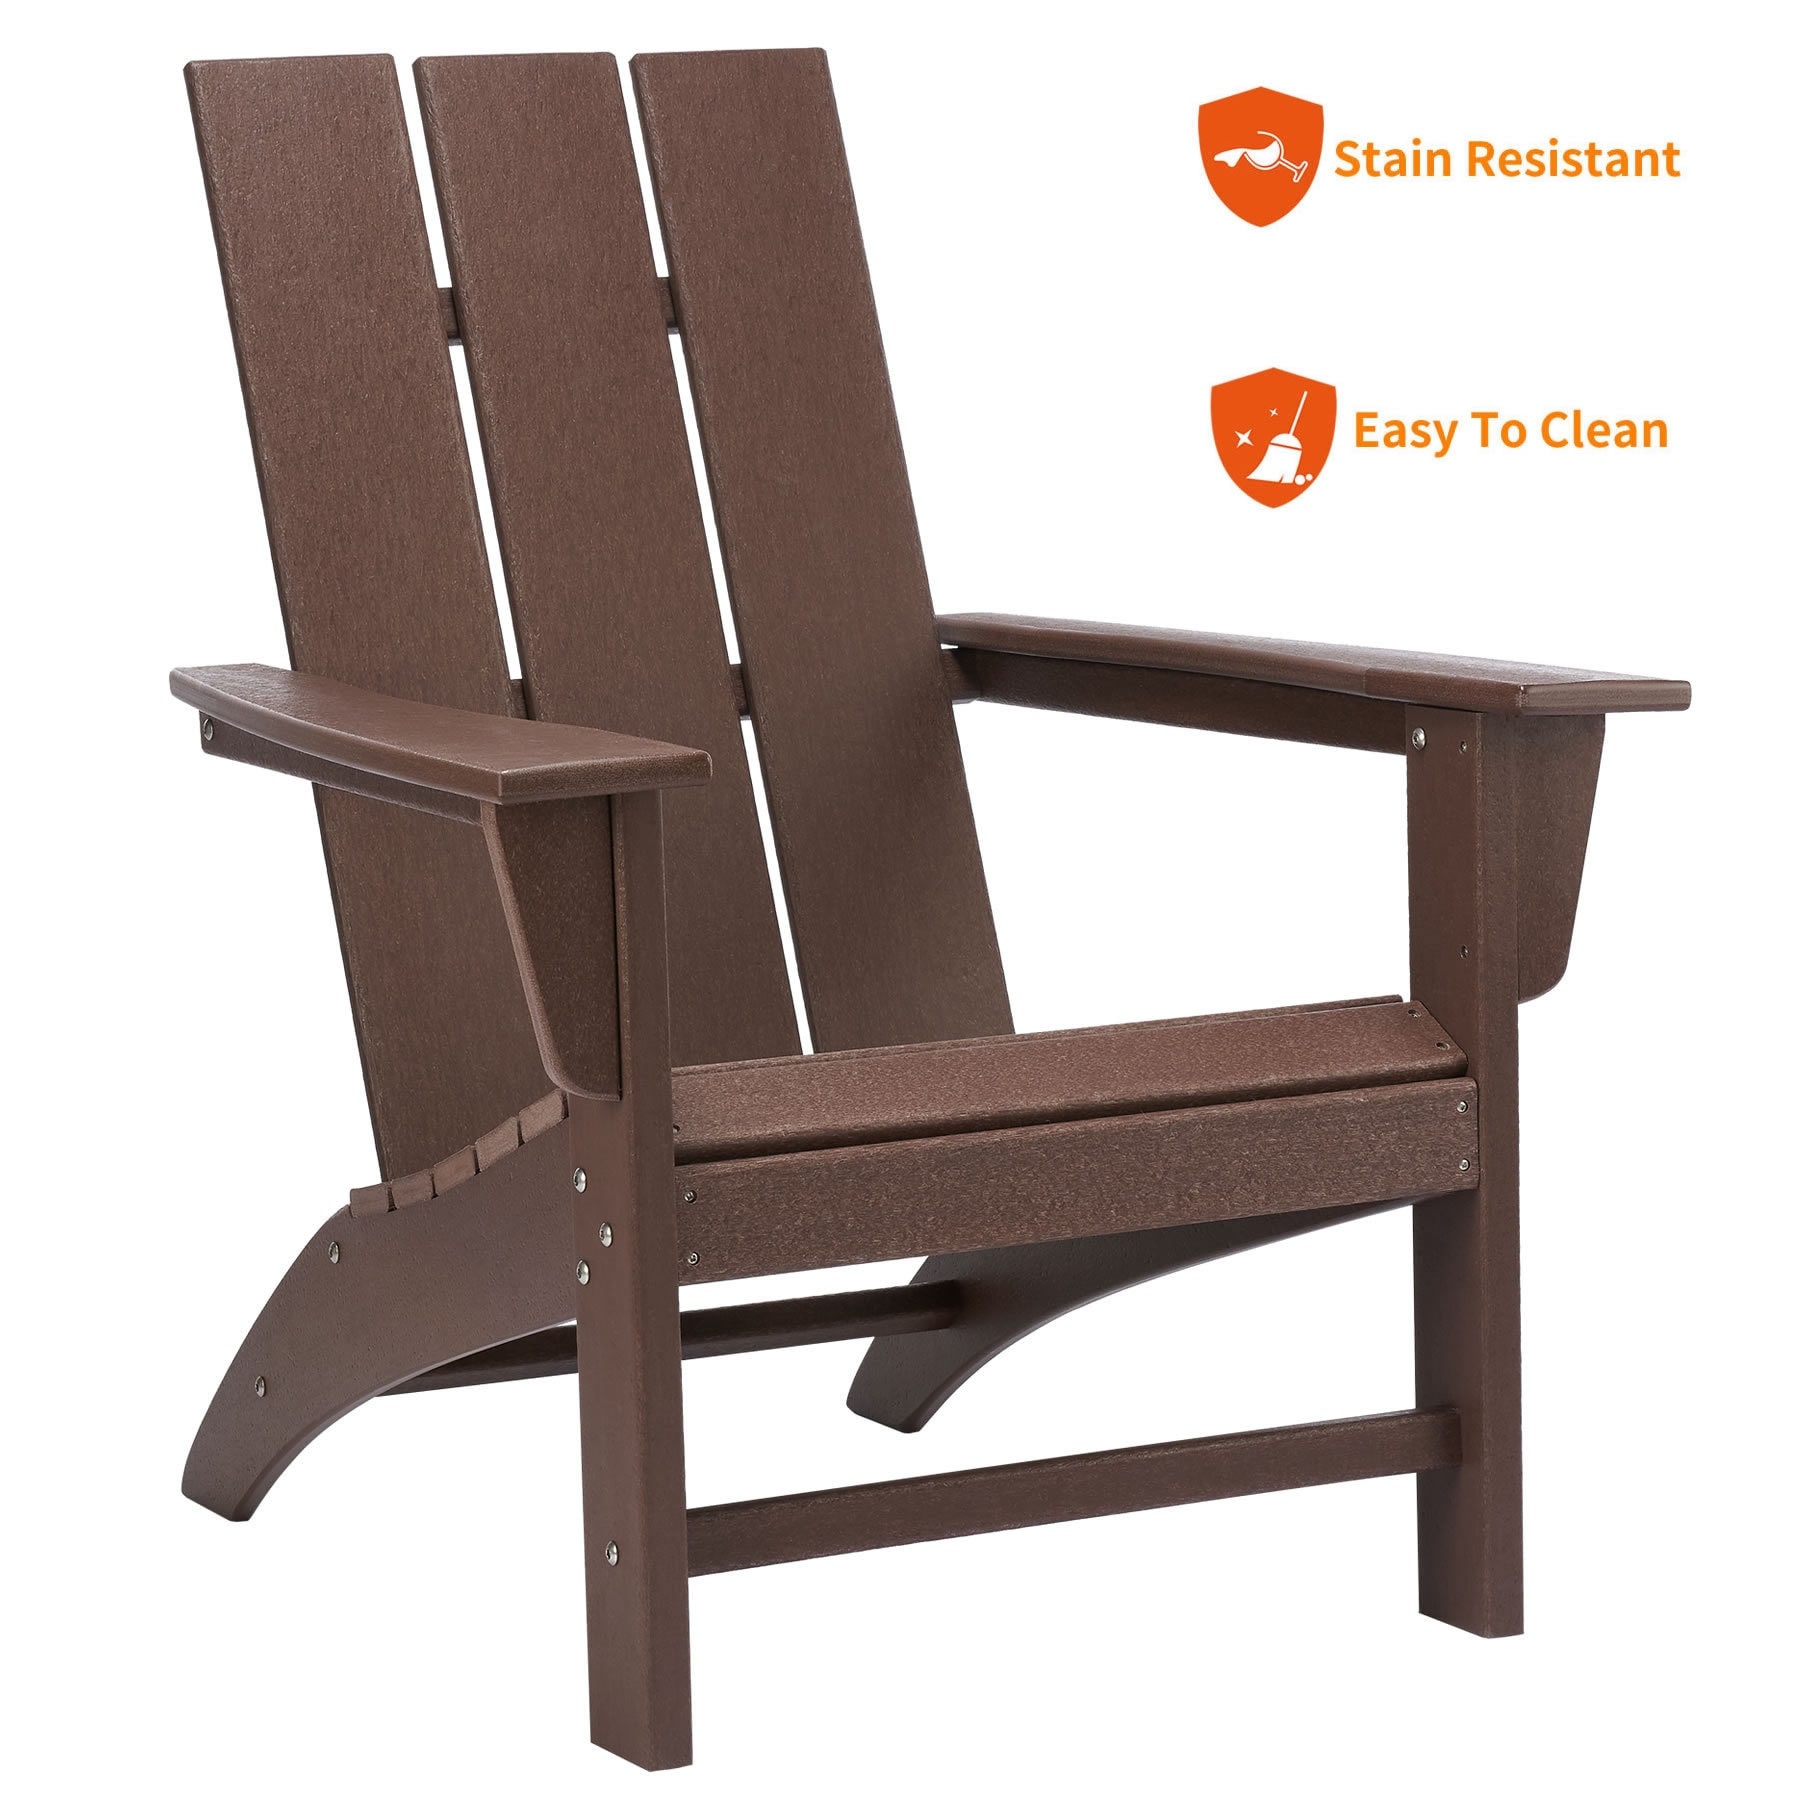 Poly Lumber Adirondack Chair Patio Chair Lawn Chair Outdoor Chairs